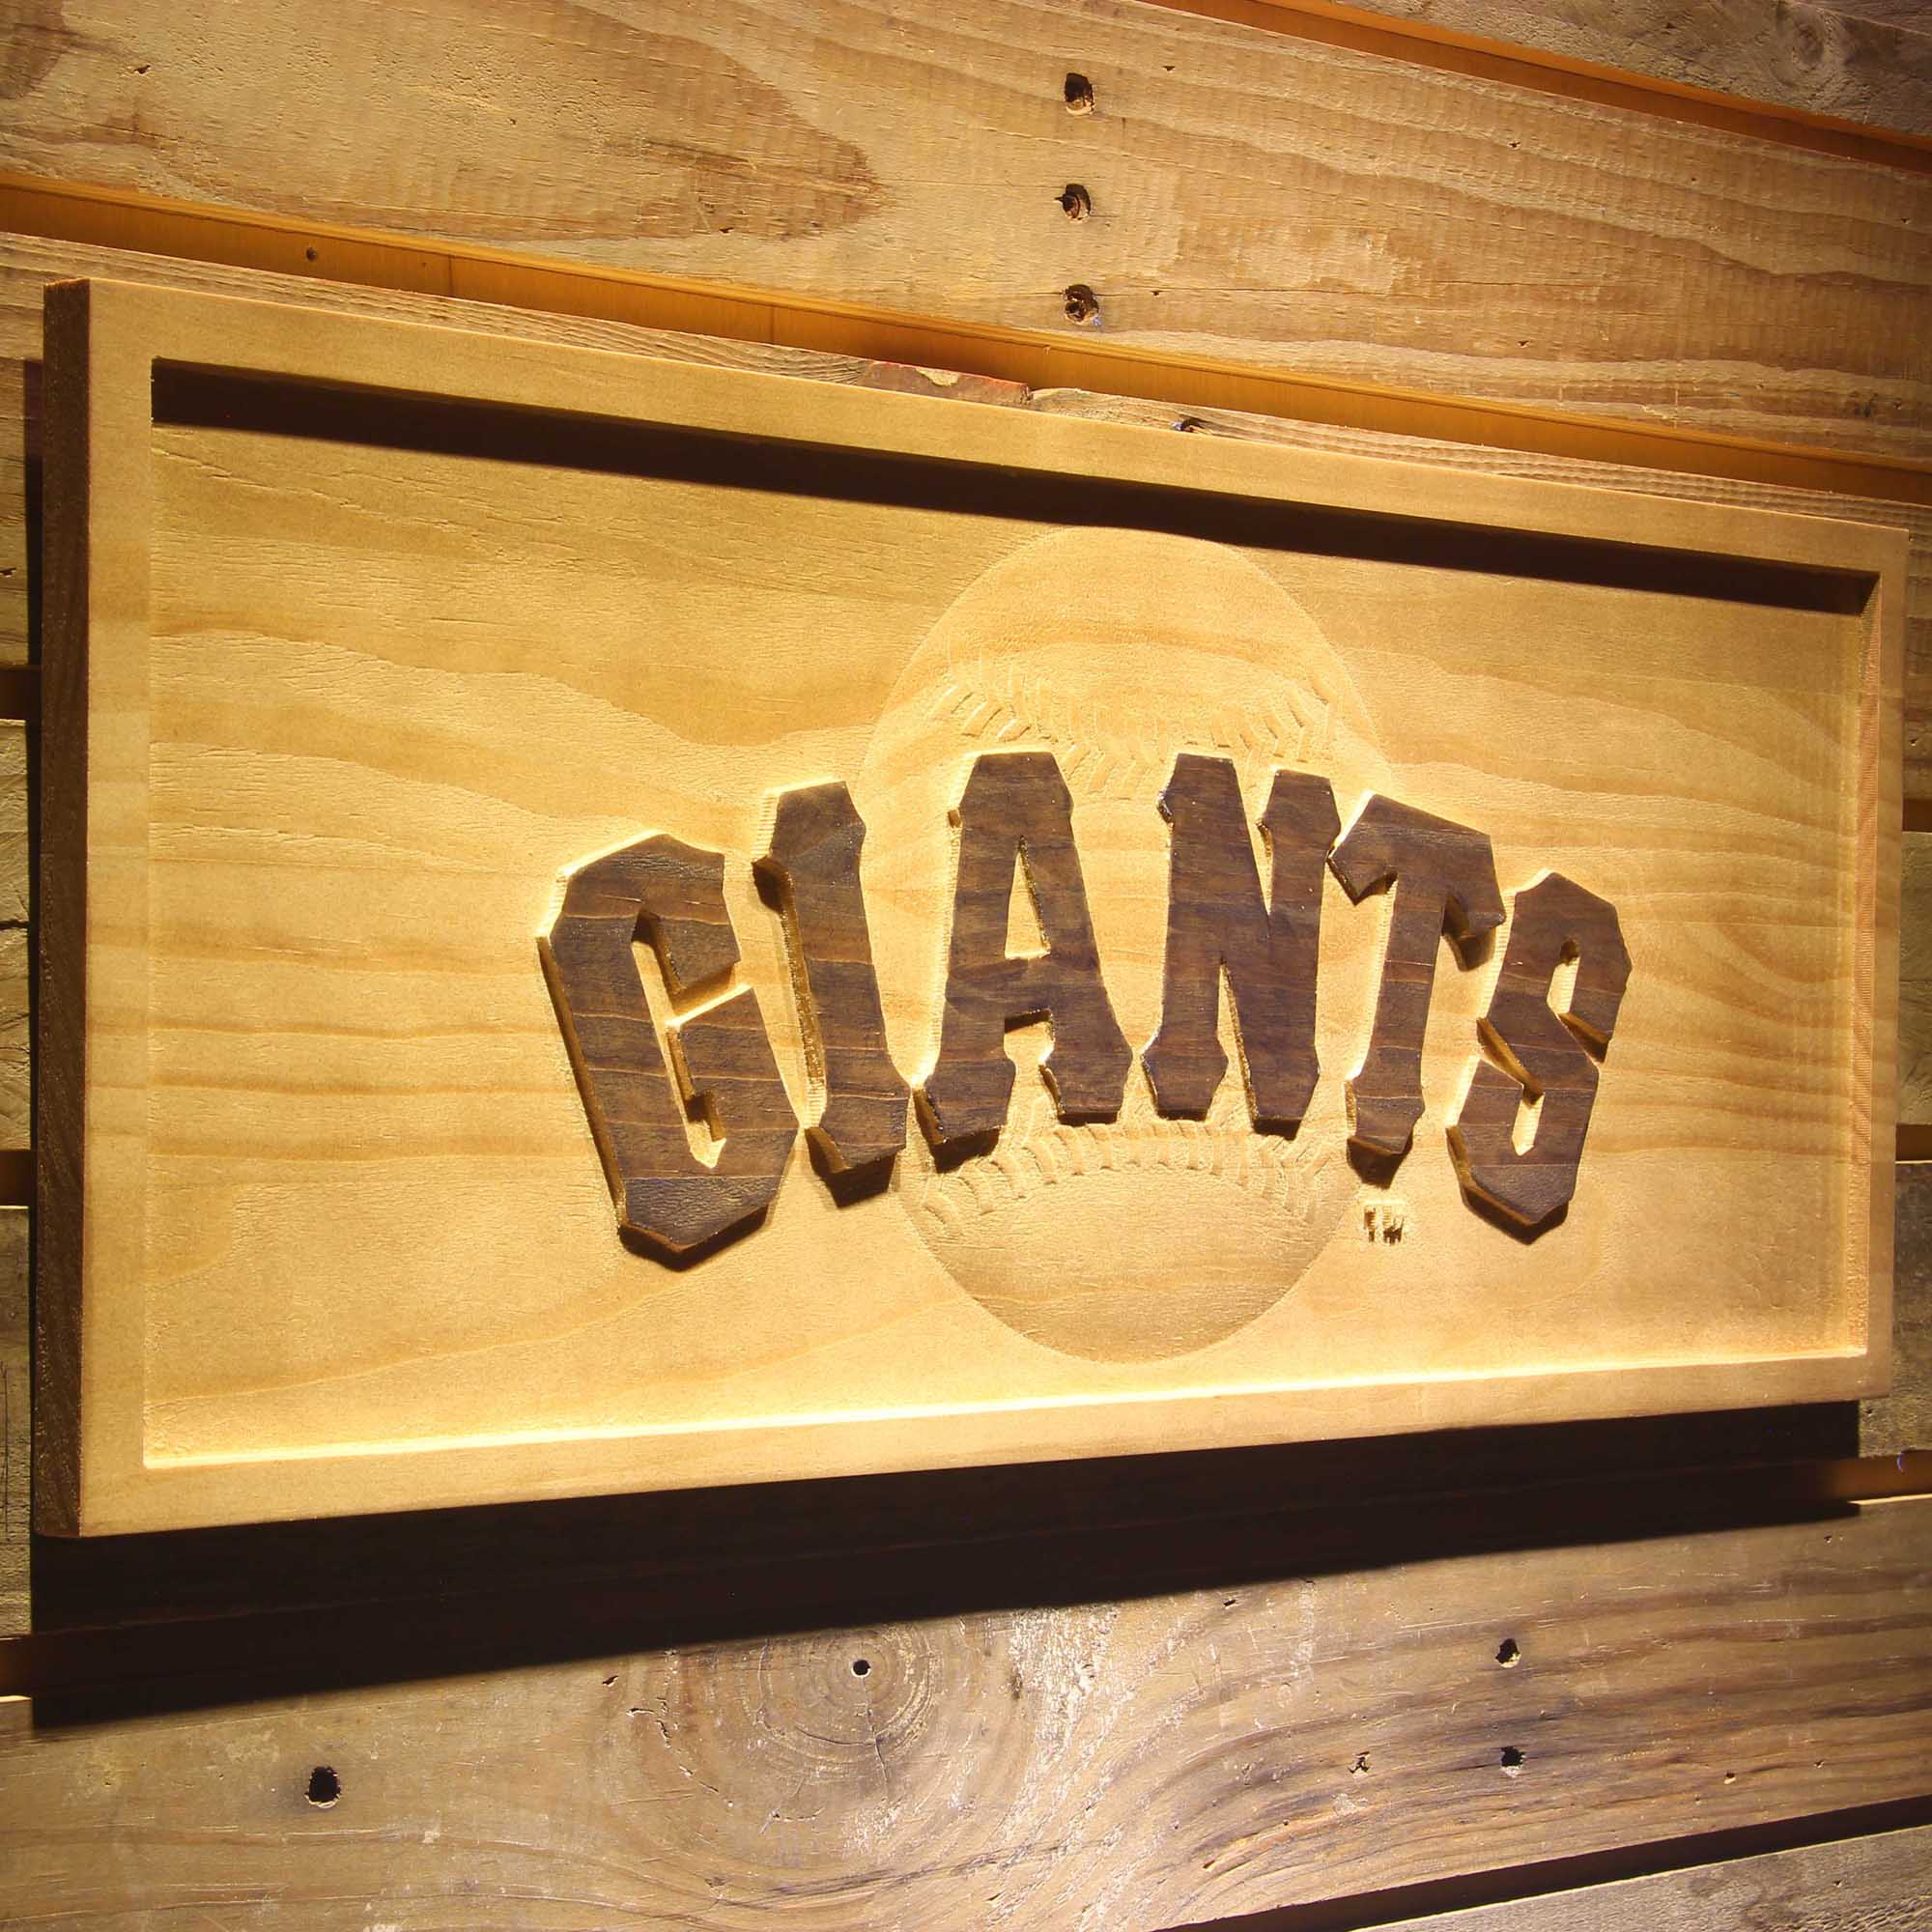 San Francisco Giants 3D Solid Wooden Craving Sign